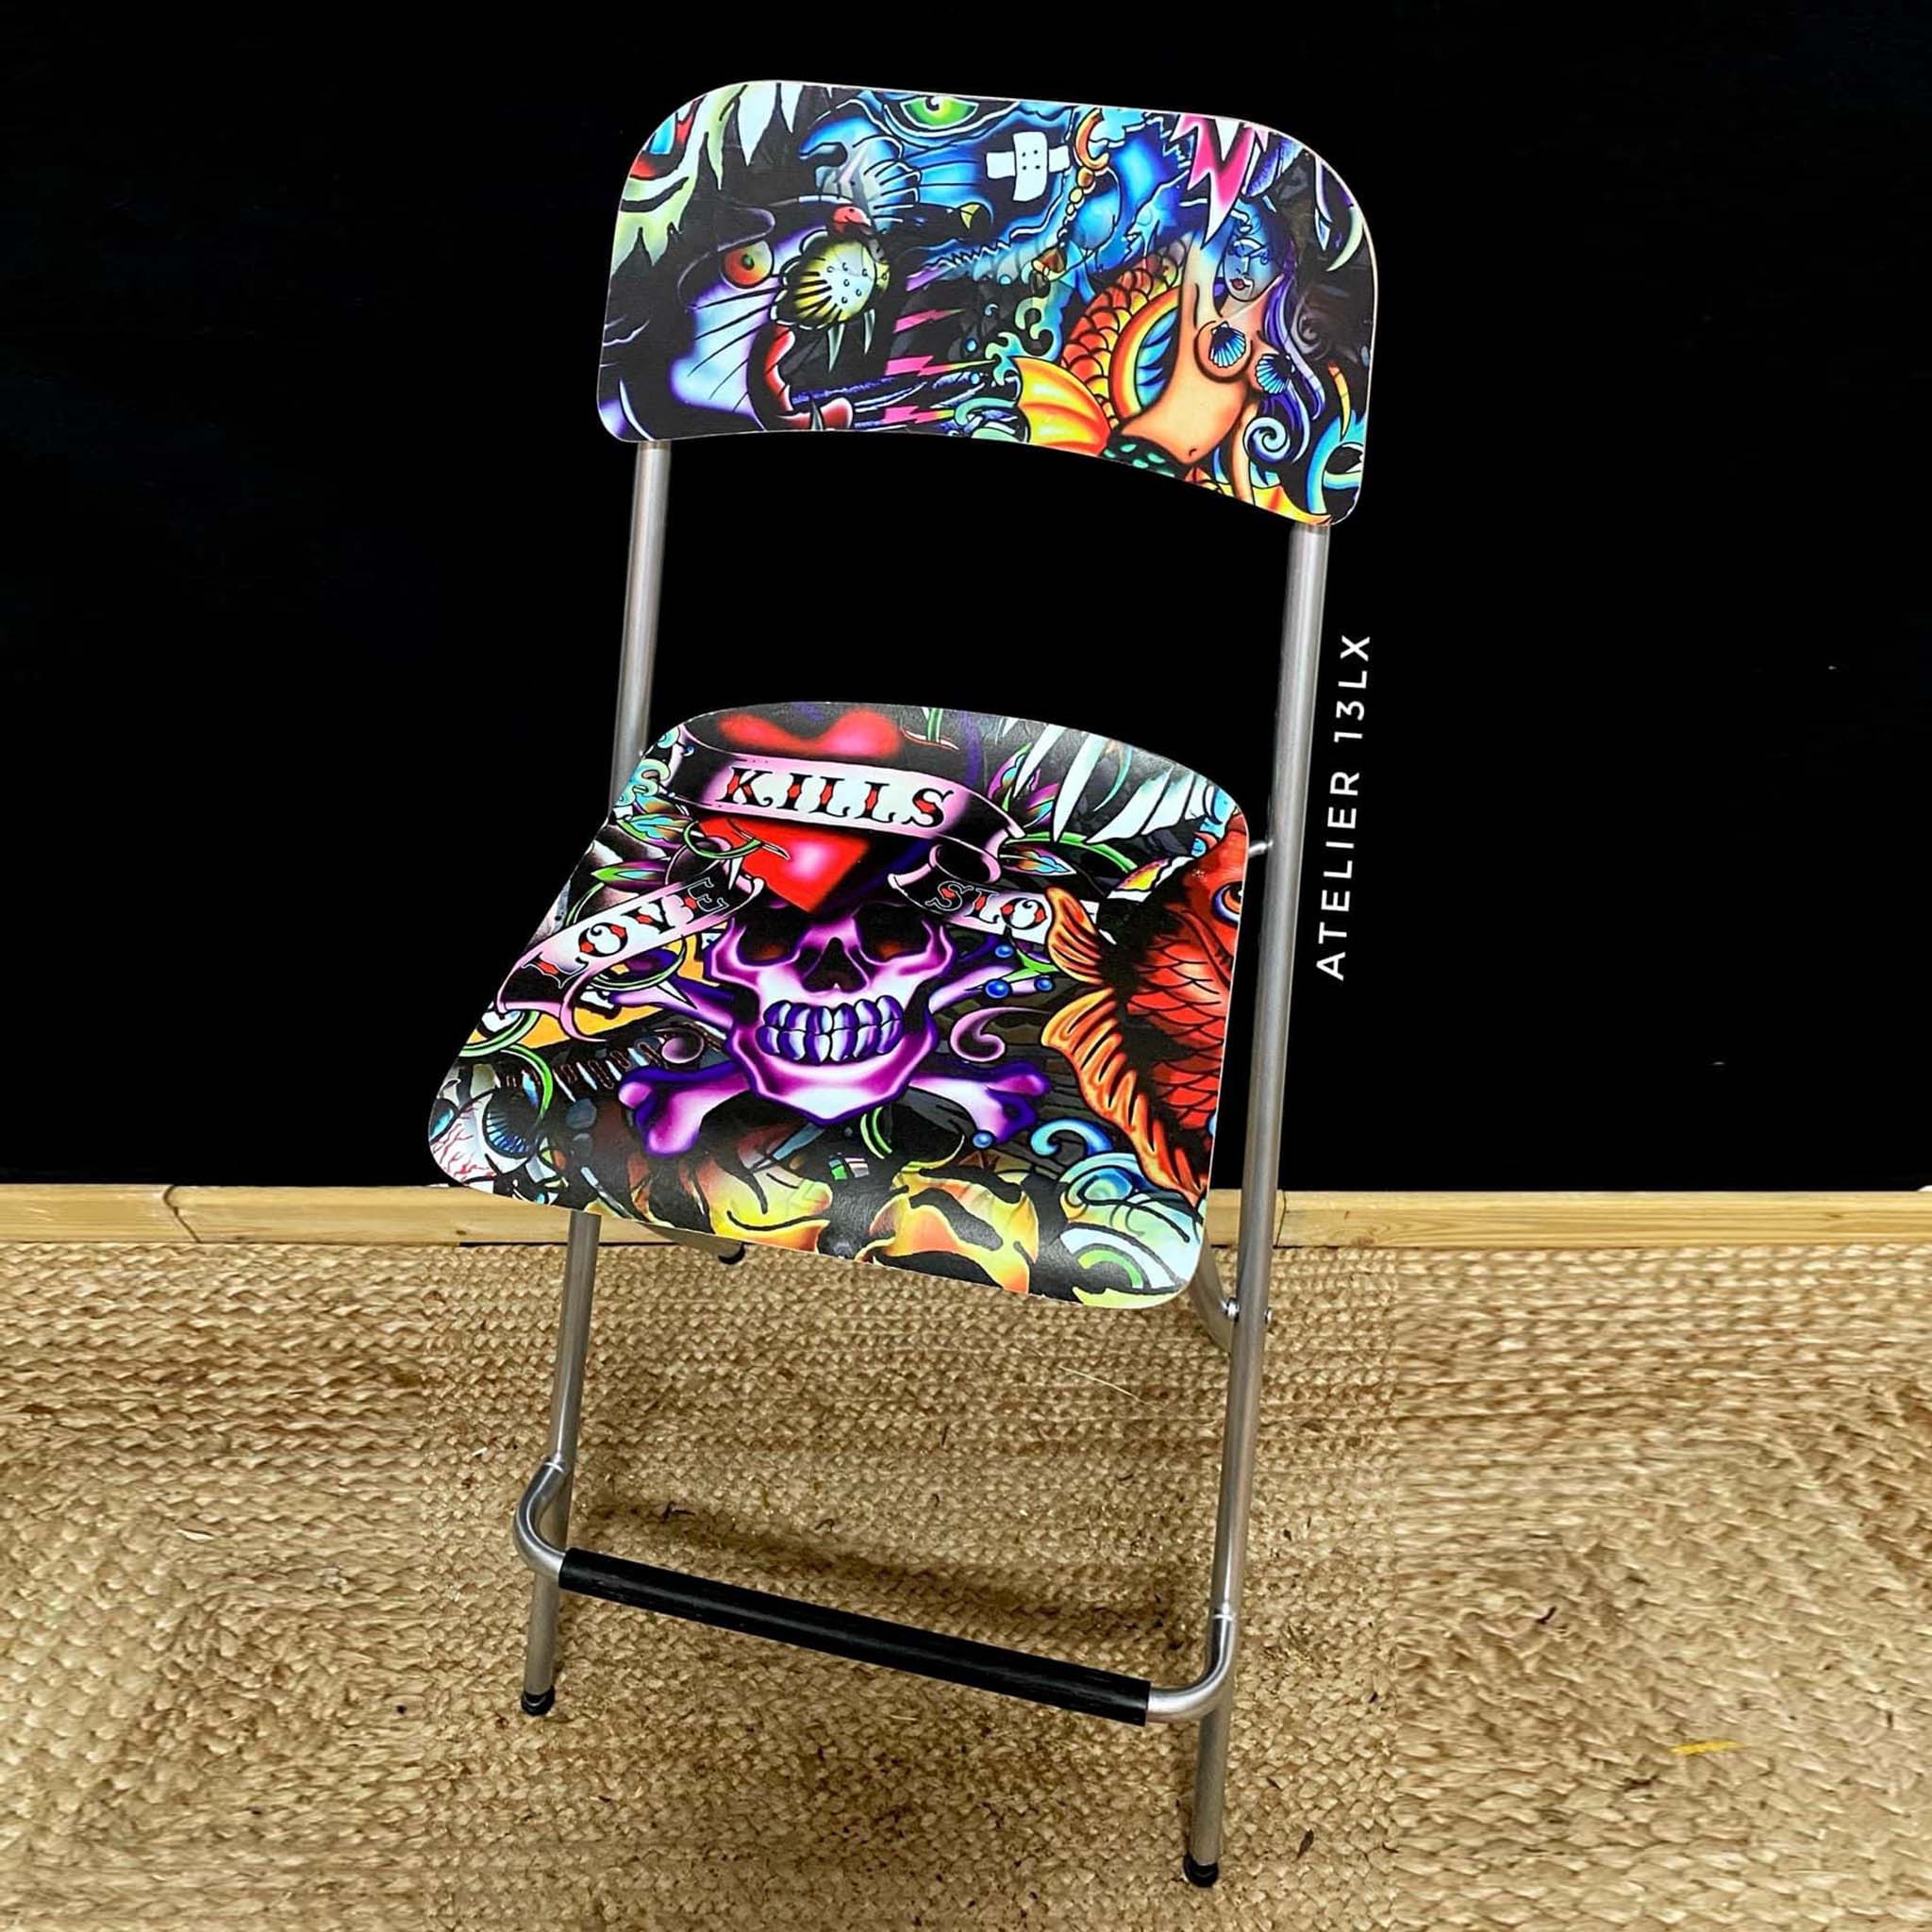 A vintage metal folding chair refurbished by Atelier 13LX features Belles & Whistles Vintage Tattoo A1 rice paper on its hard platic back and seat.